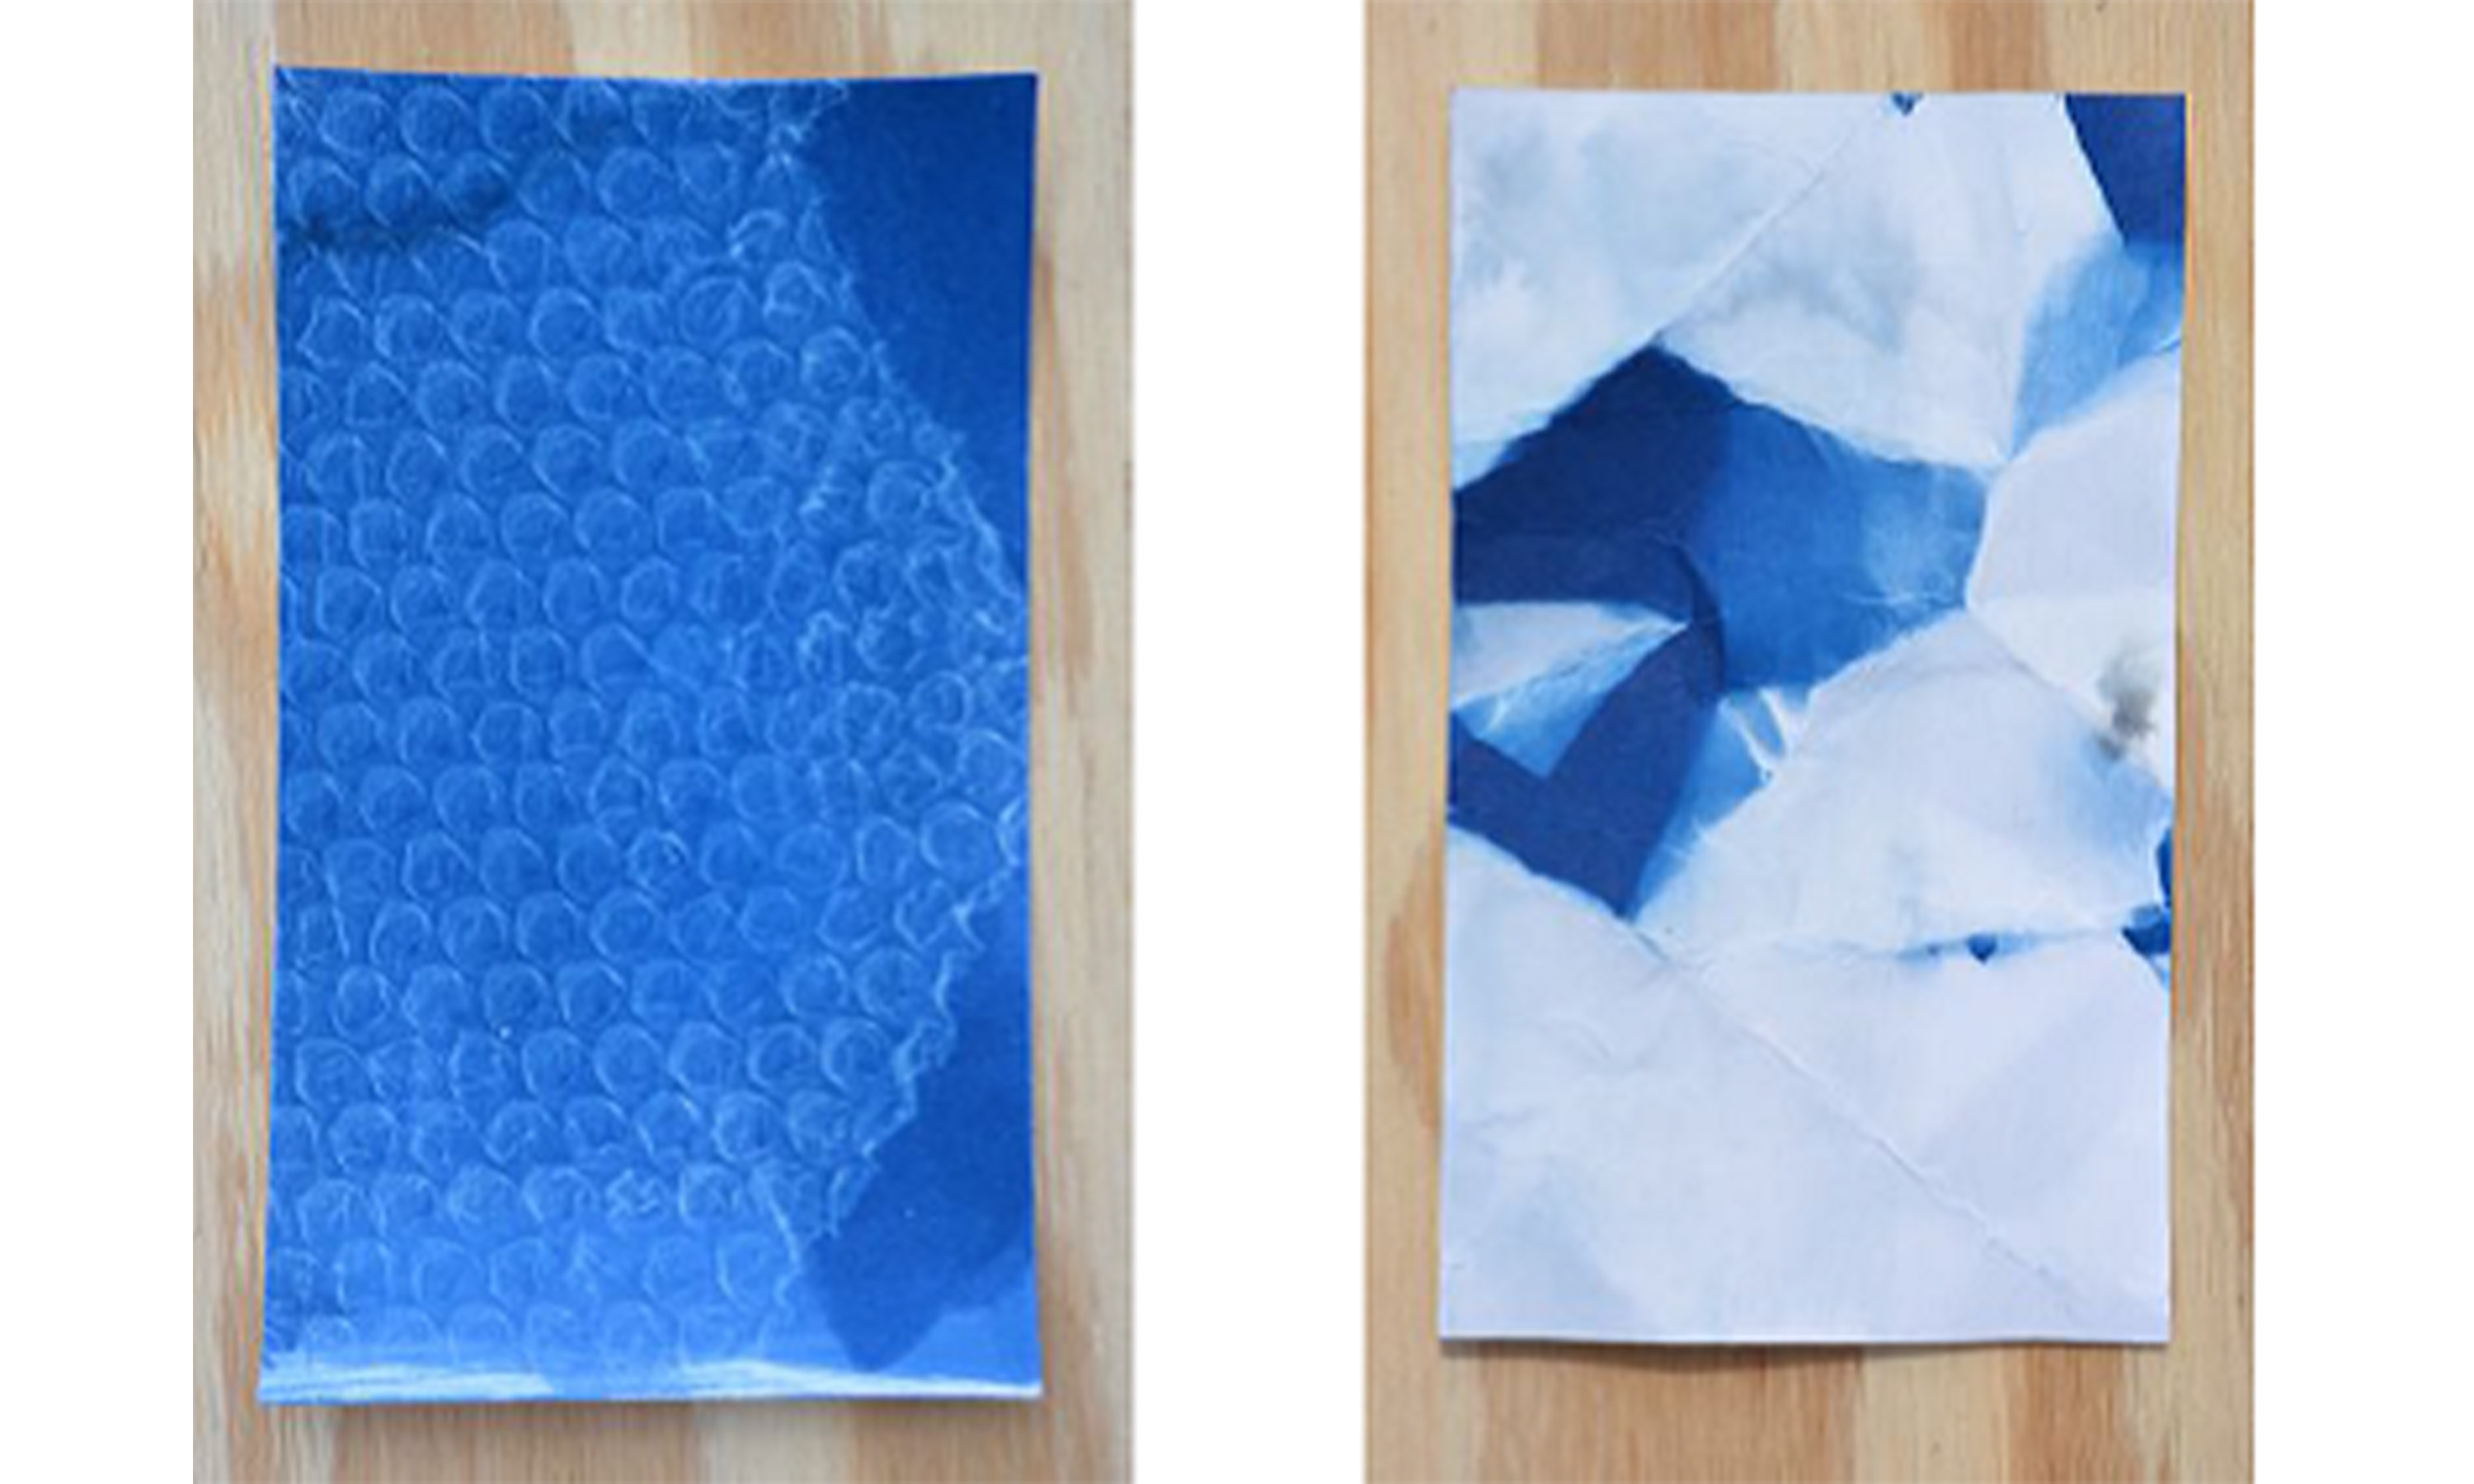 Two cyanotypes of textured materials